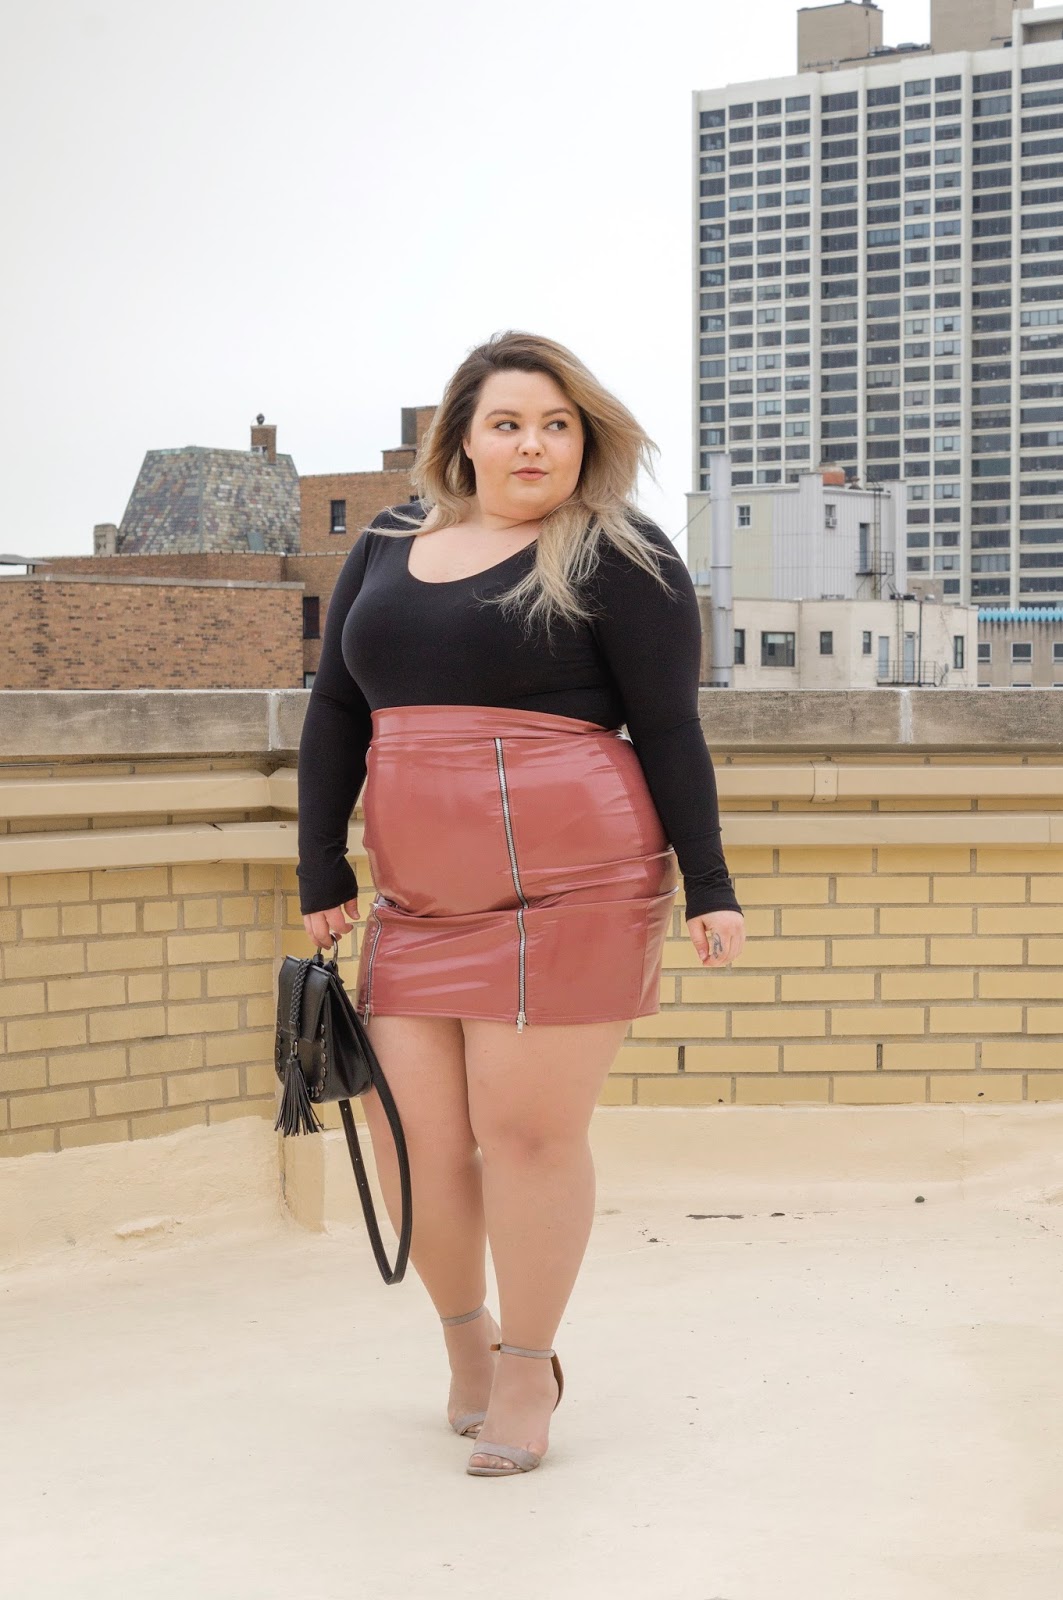 natalie in the city, Chicago fashion blogger, plus size fashion blogger, Chicago style, natalie craig, latex plus size skirt, plus size leather skirt, zipper skirt, plus size body suits, pretty little thing, affordable plus size fashion, embrace your curves, eff your beauty standards, plus model magazine